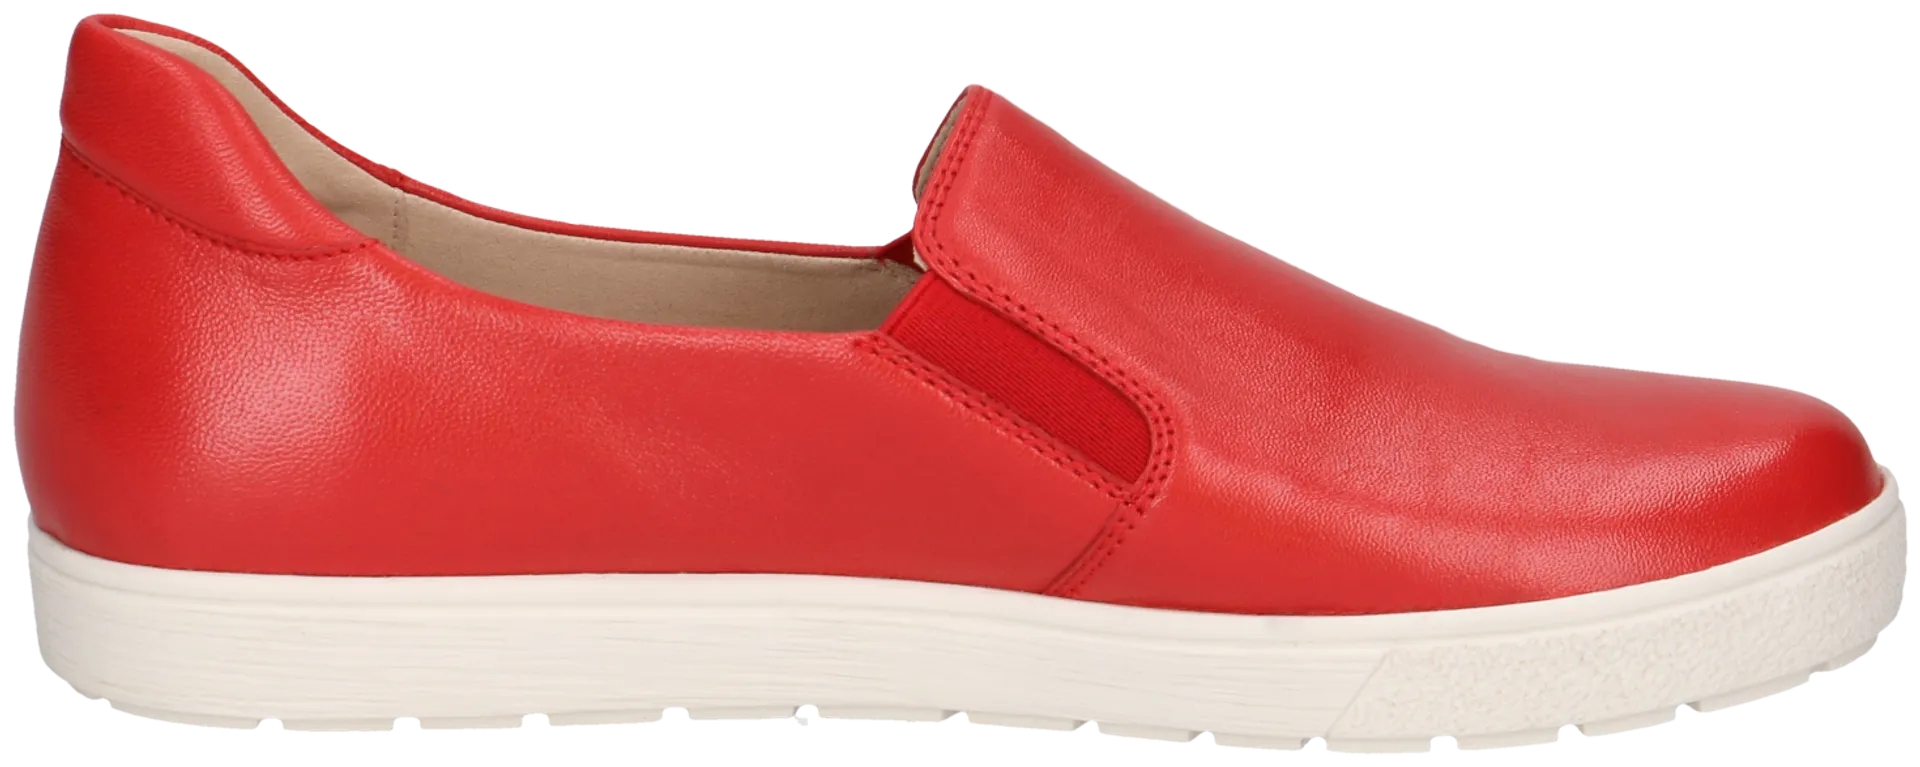 Caprice naisten loafer - Red softnappa - 3